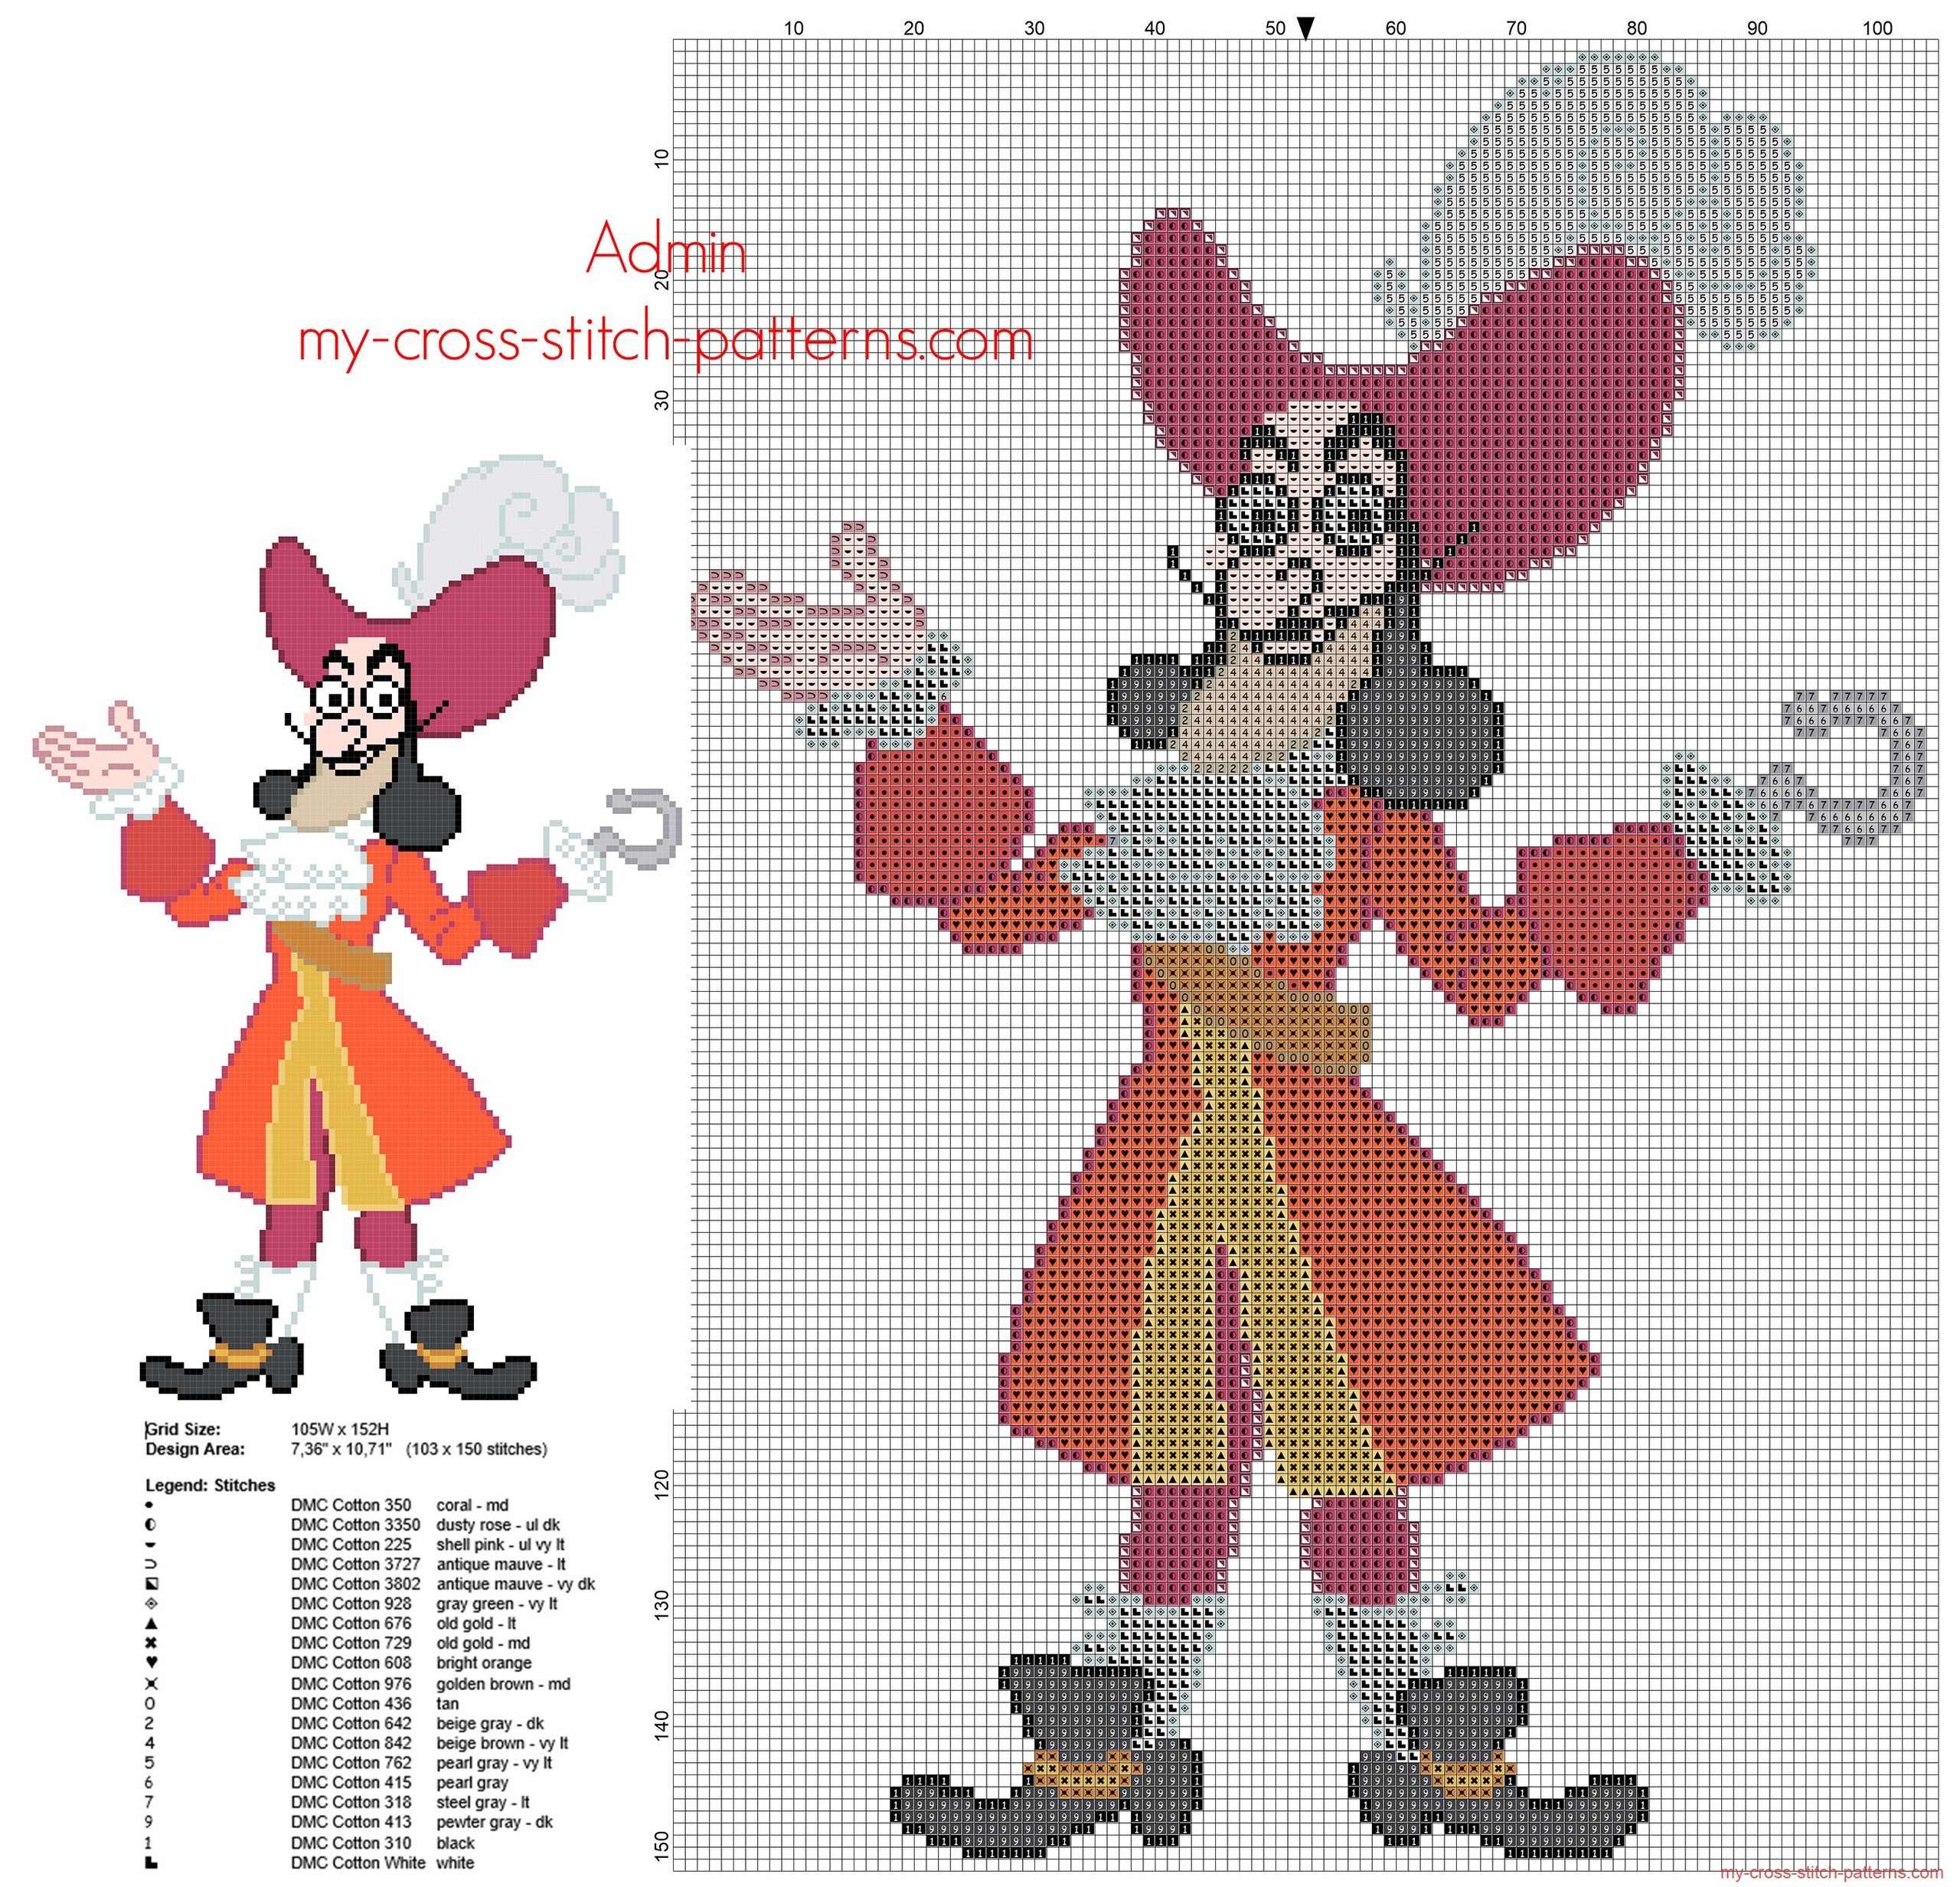 captain_james_hook_from_disney_jake_and_the_never_land_pirates_cross_stitch_pattern